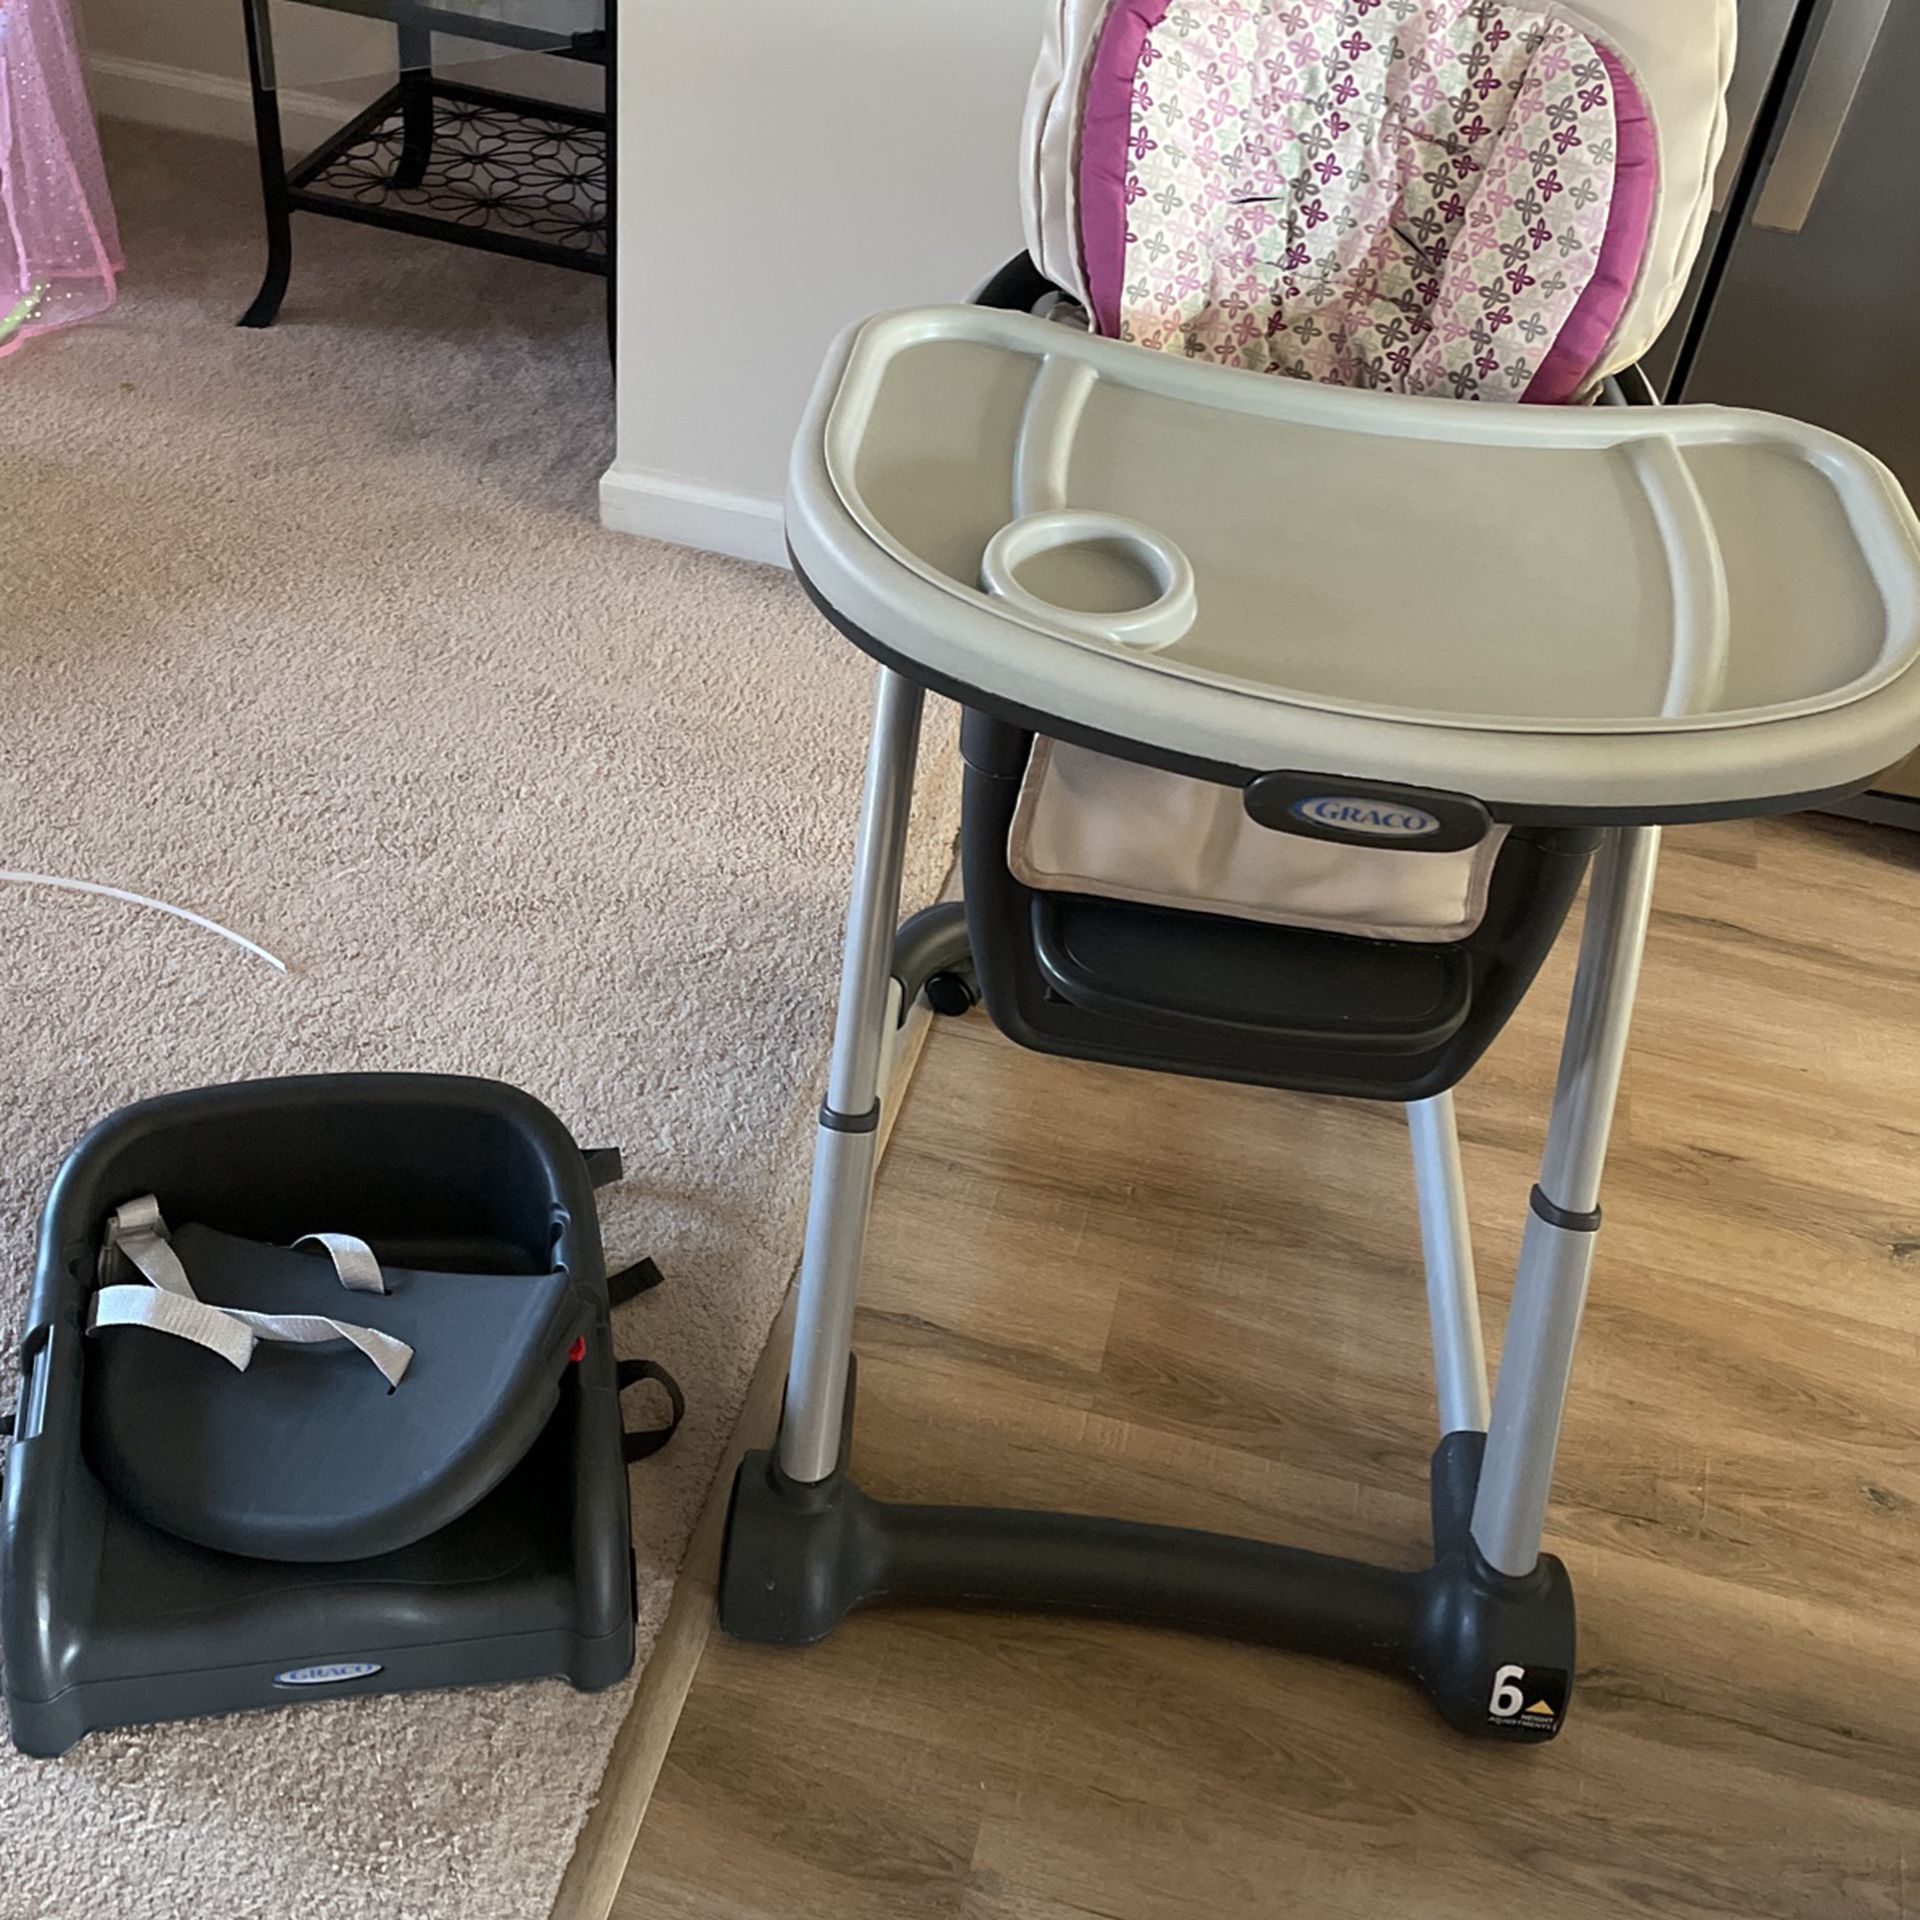 High Chair Convertible Into Booster Chair (0-6yrs)